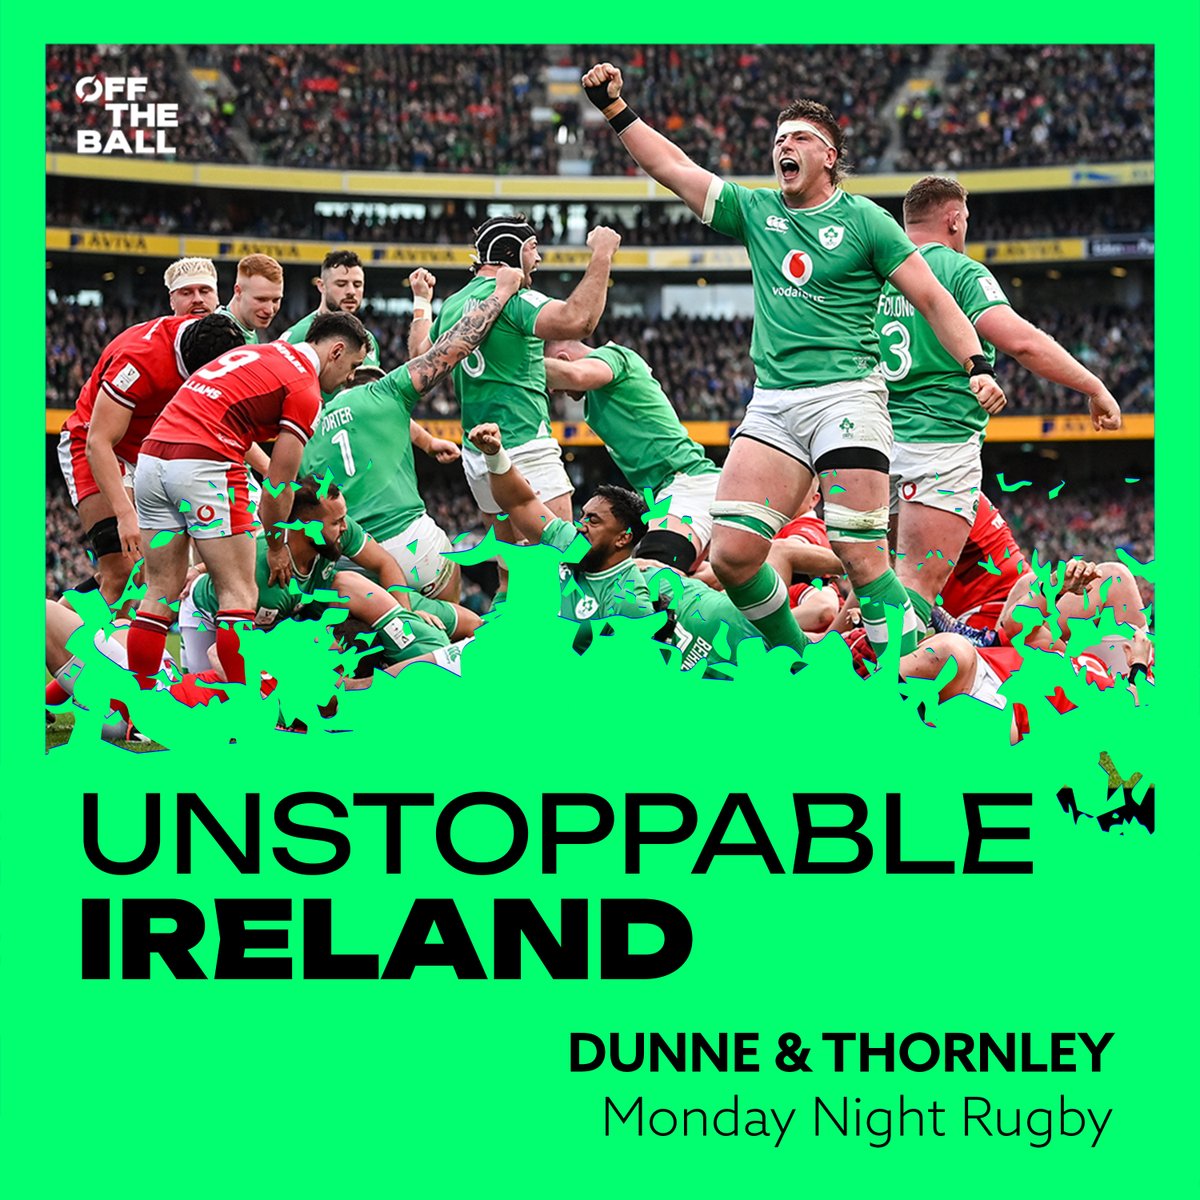 🎧 PODCAST 🎧 𝑴𝒐𝒏𝒅𝒂𝒚 𝑵𝒊𝒈𝒉𝒕 𝑹𝒖𝒈𝒃𝒚! Andrew Dunne & Gerry Thornley joined Joe Molloy to talk all things #SixNationsRugby 🏉 LISTEN ➡️ podcasts.apple.com/us/podcast/mon…